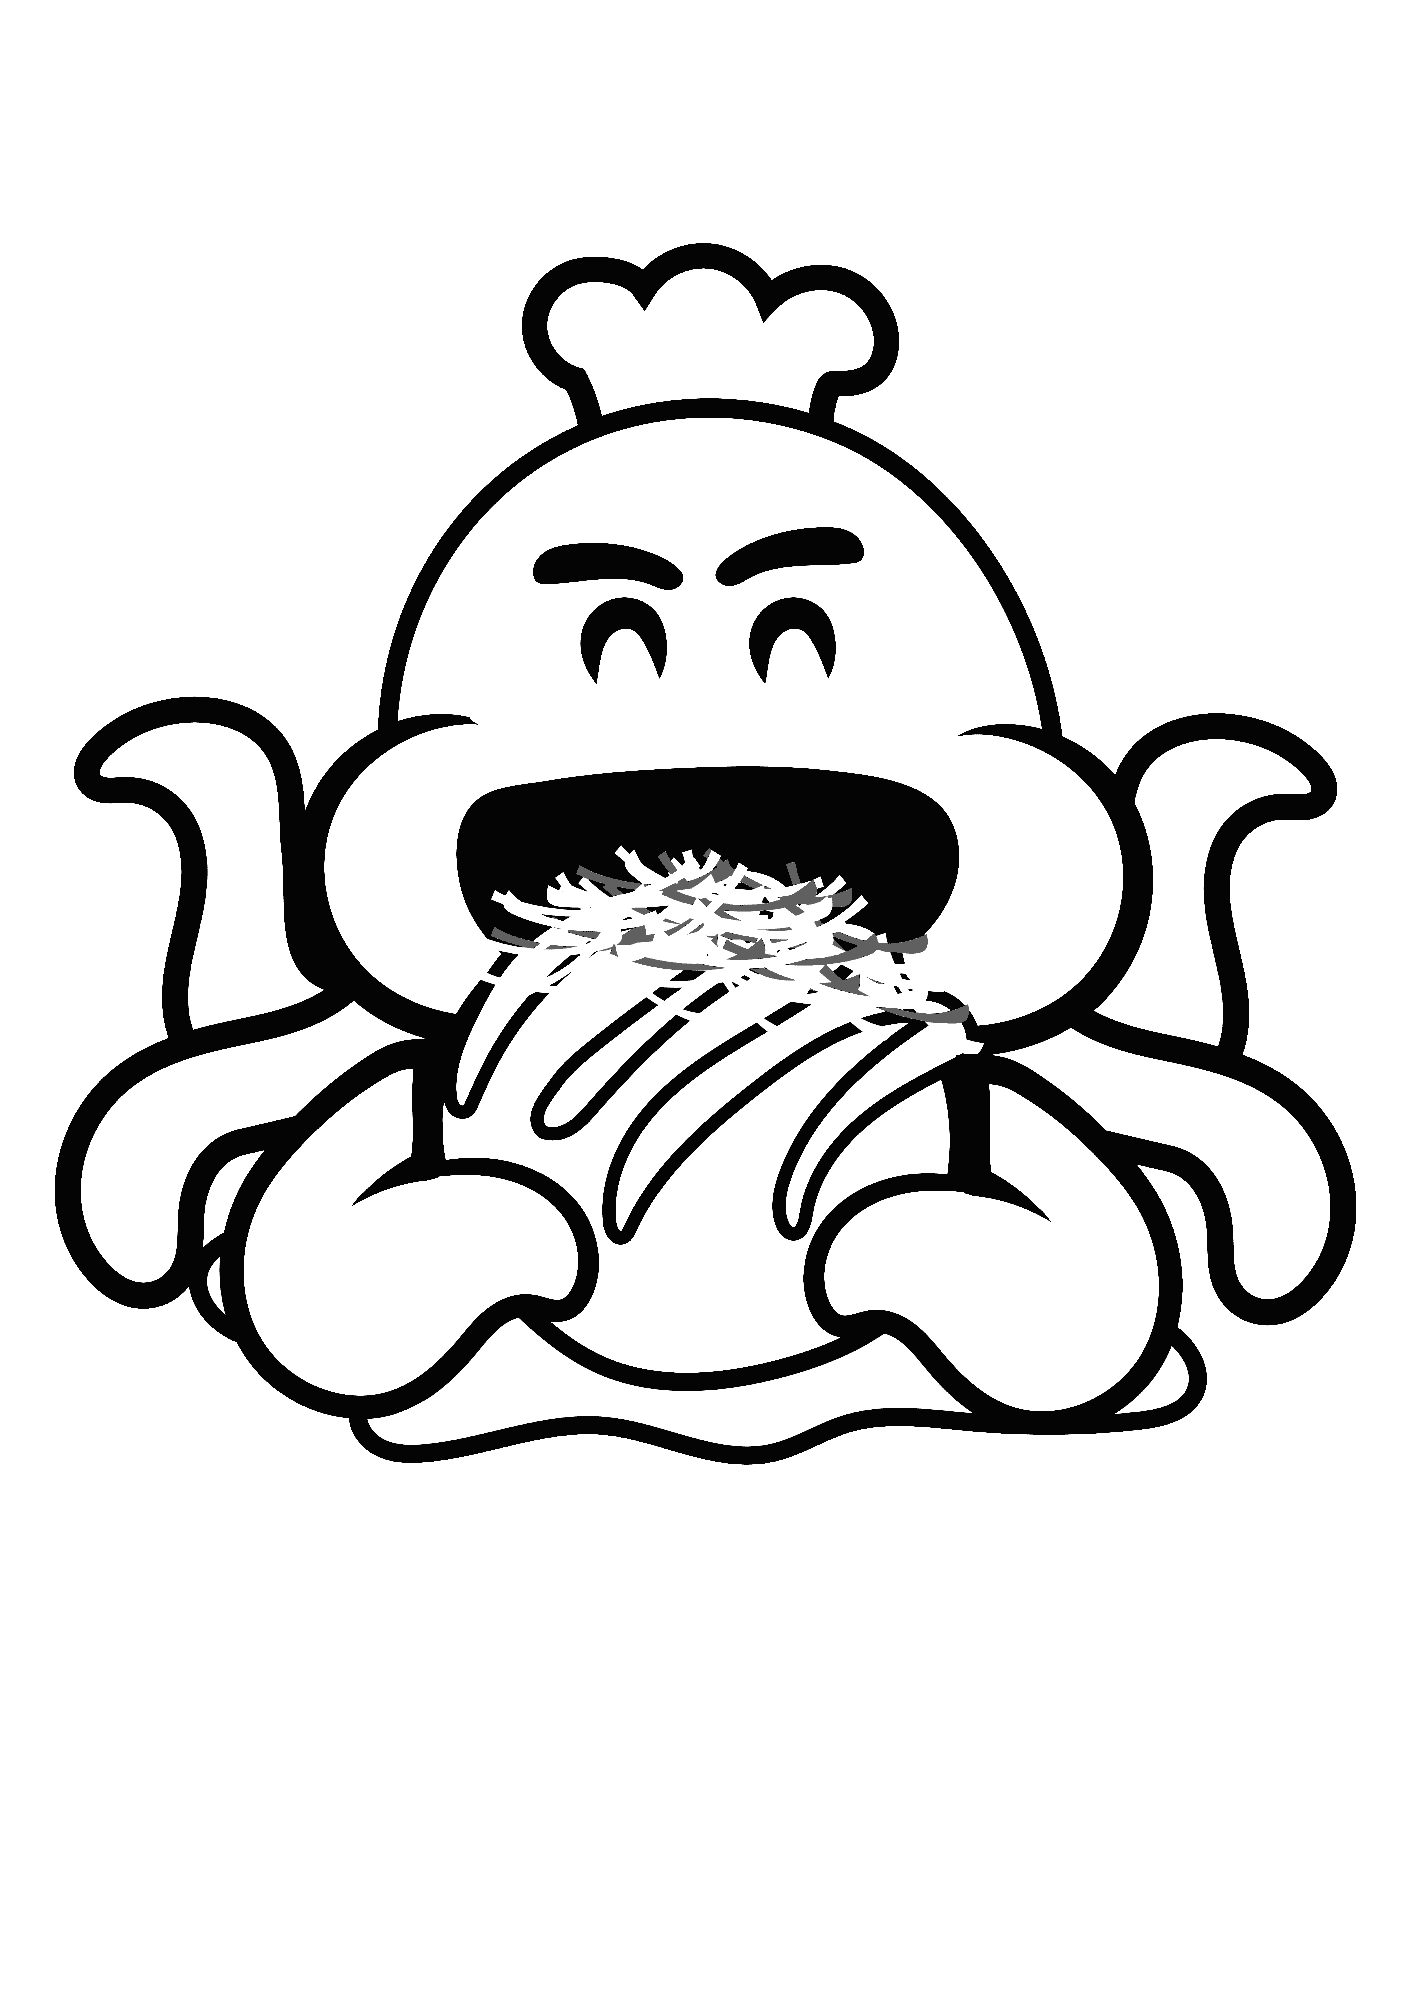 Squid For Children Coloring Pages